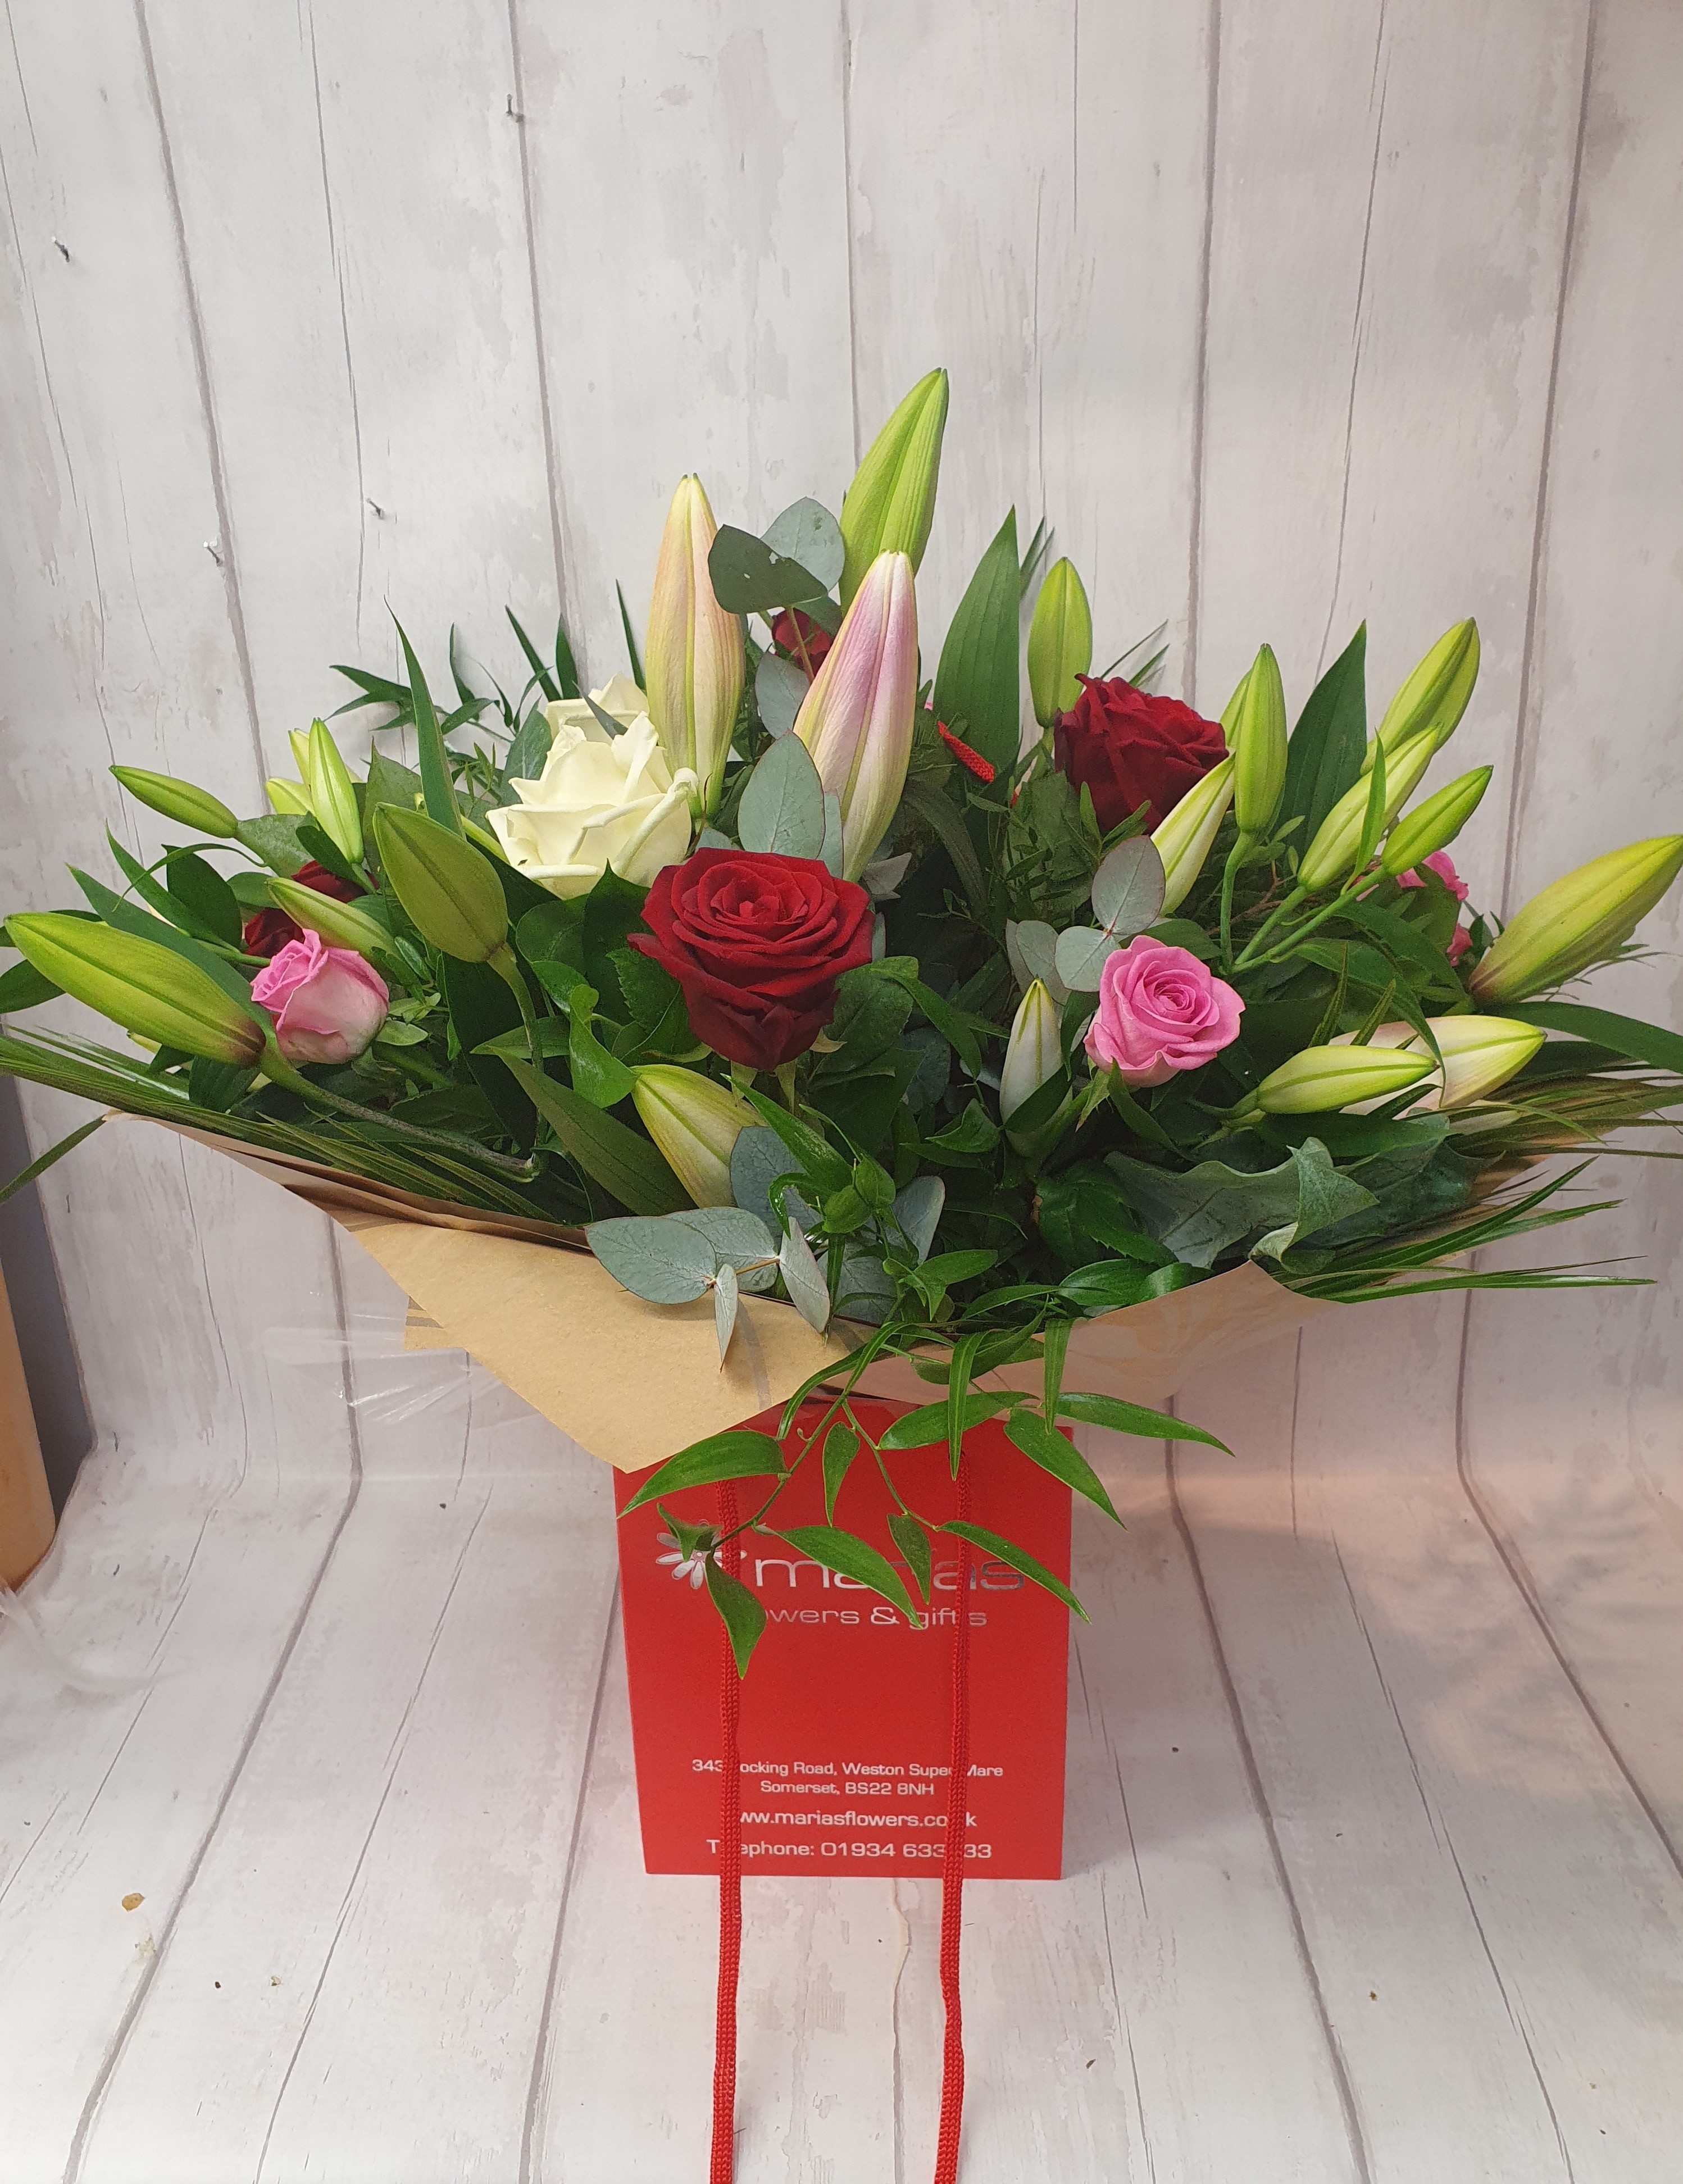 Extra large Rose and Lily Handtied Flower Arrangement